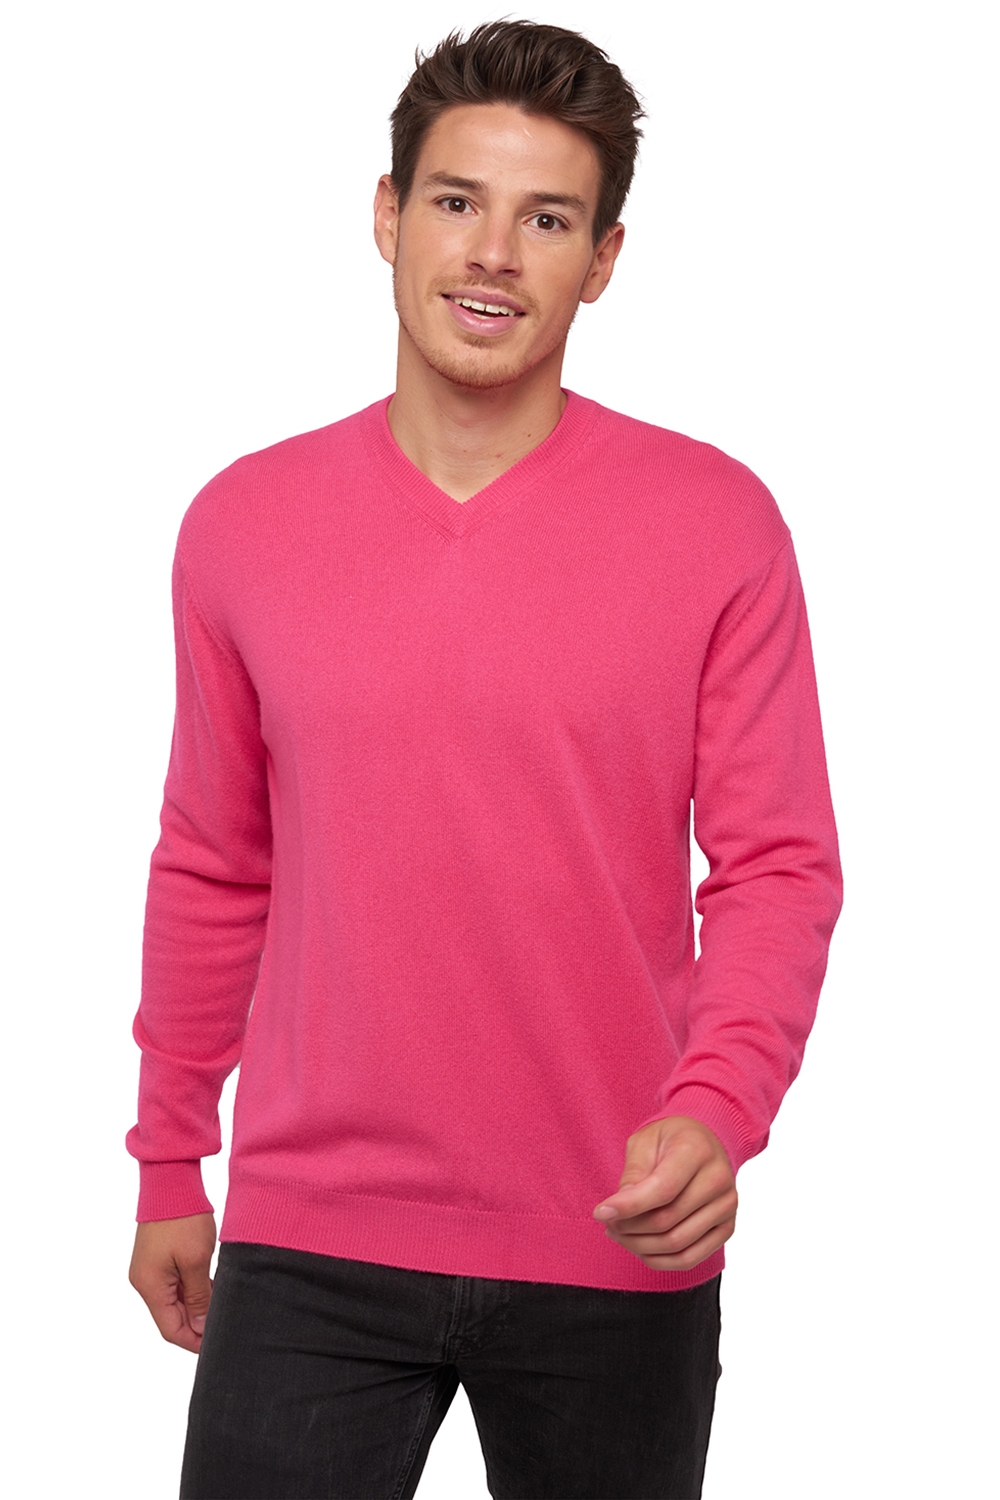 Cachemire pull homme gaspard rose shocking xl